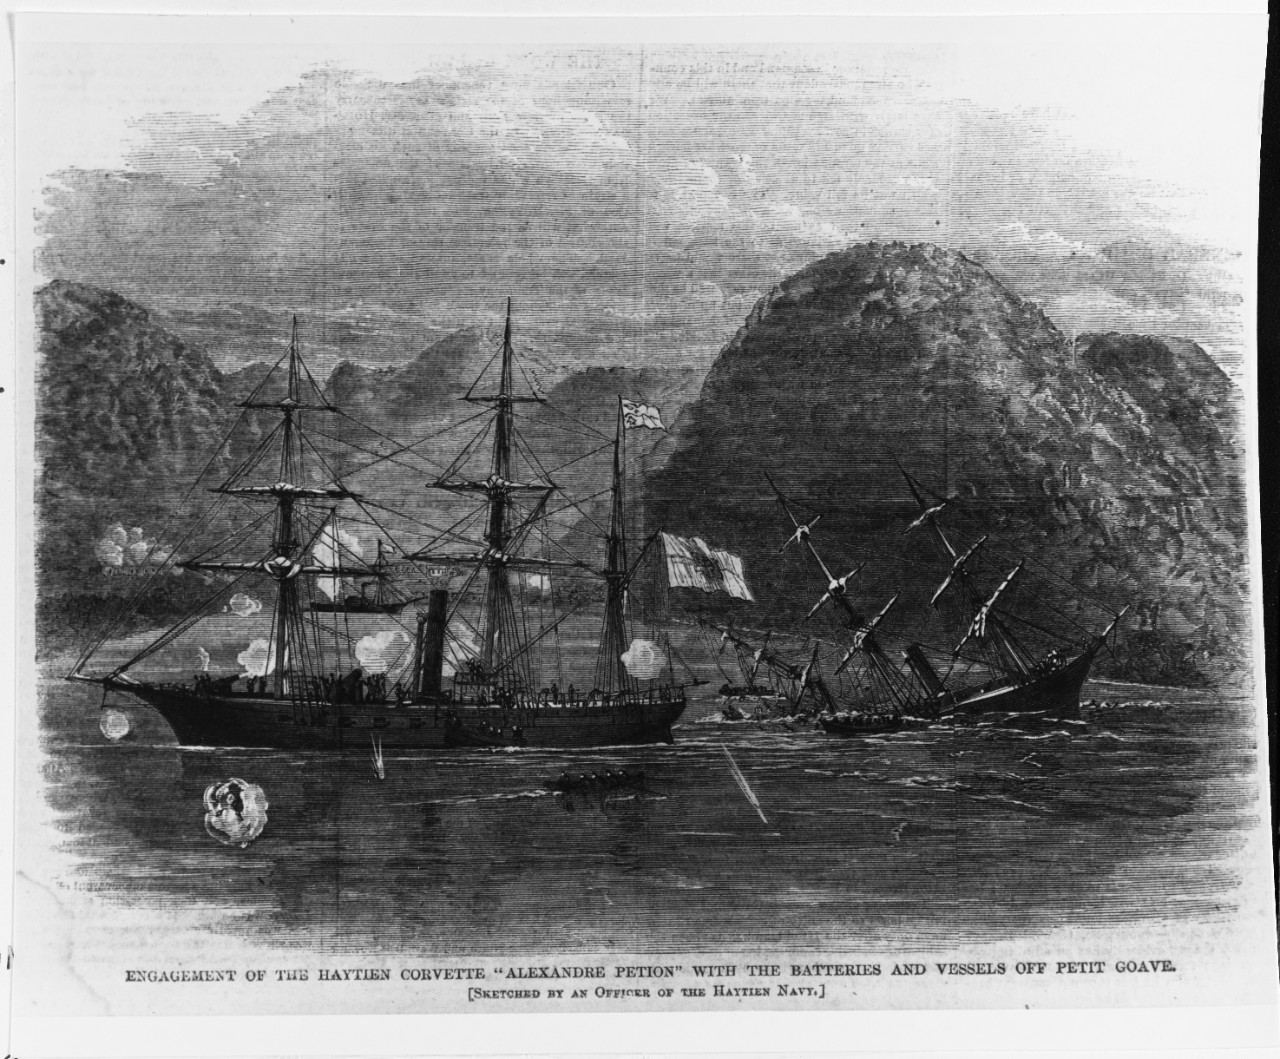 "Engagement of The HAYTIEN CORVETTE 'ALEXANDRE PETION' With the Batteries and Vessels off Petit Goave", 20 Sept 1868.